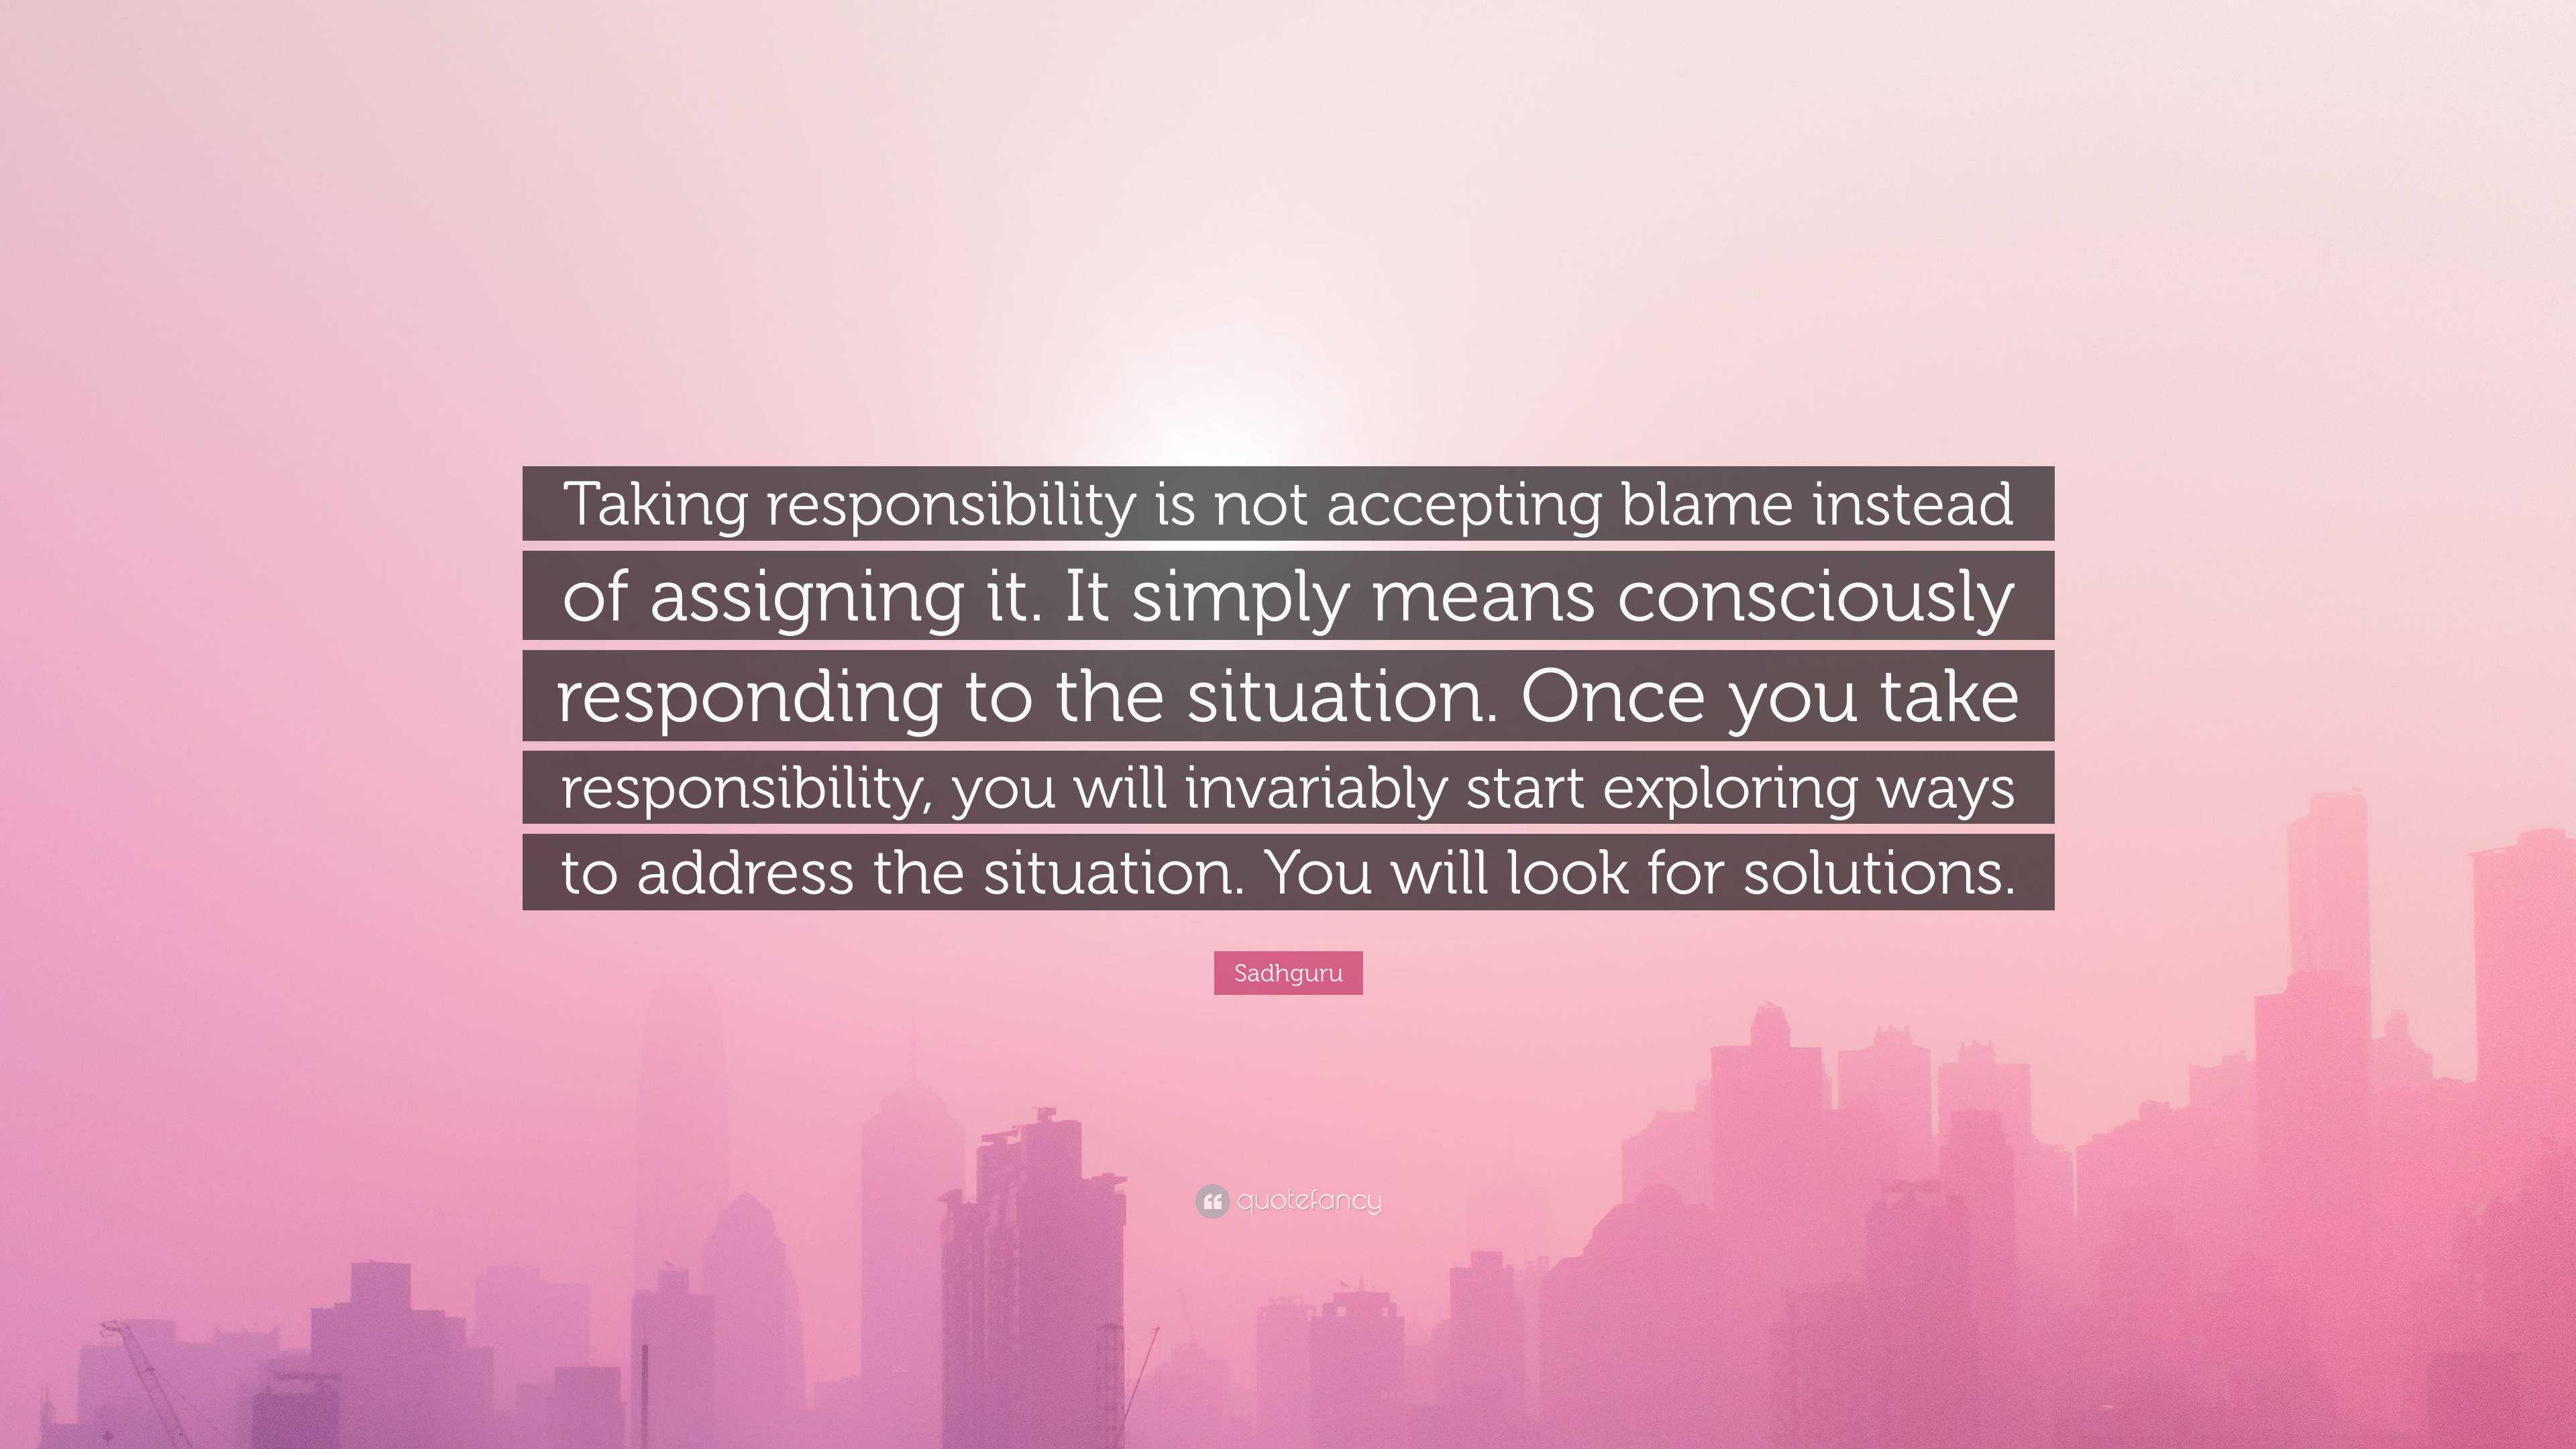 assigning blame quote